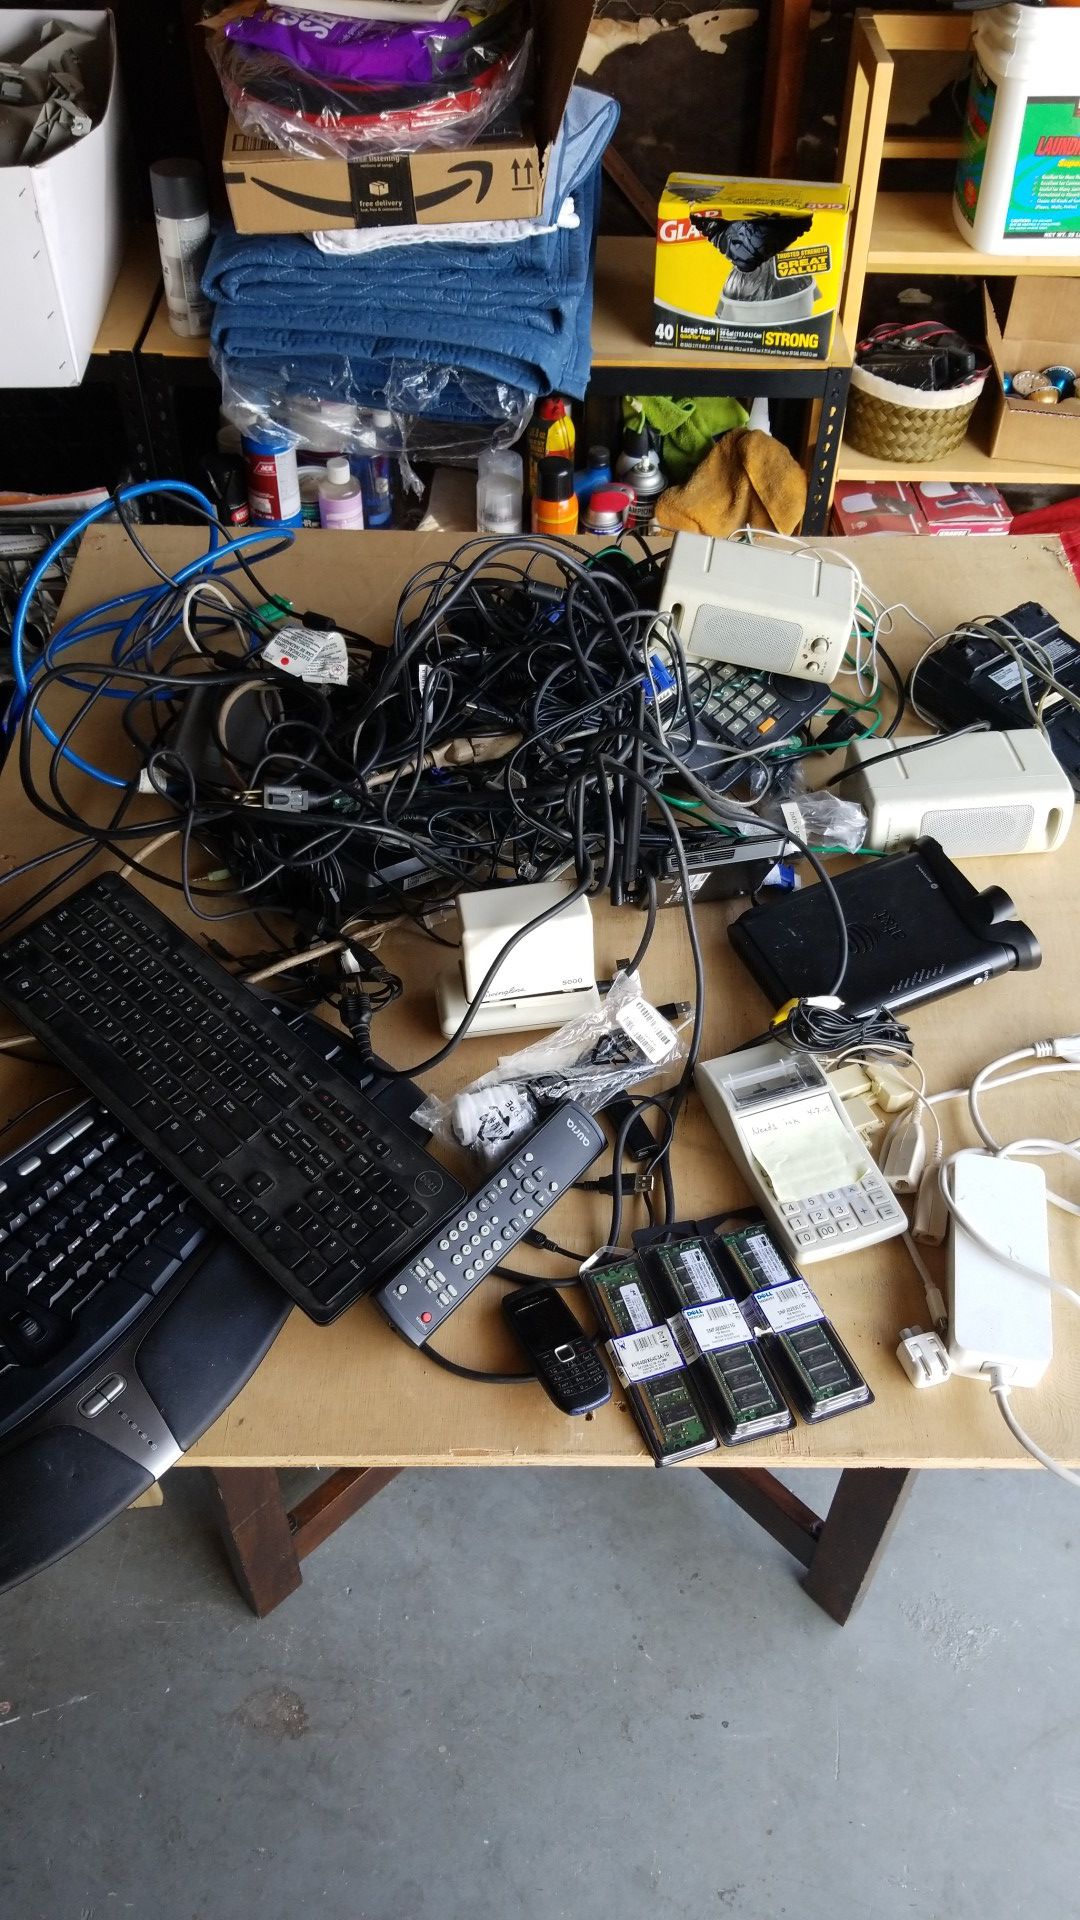 Assorted electronics and computer parts